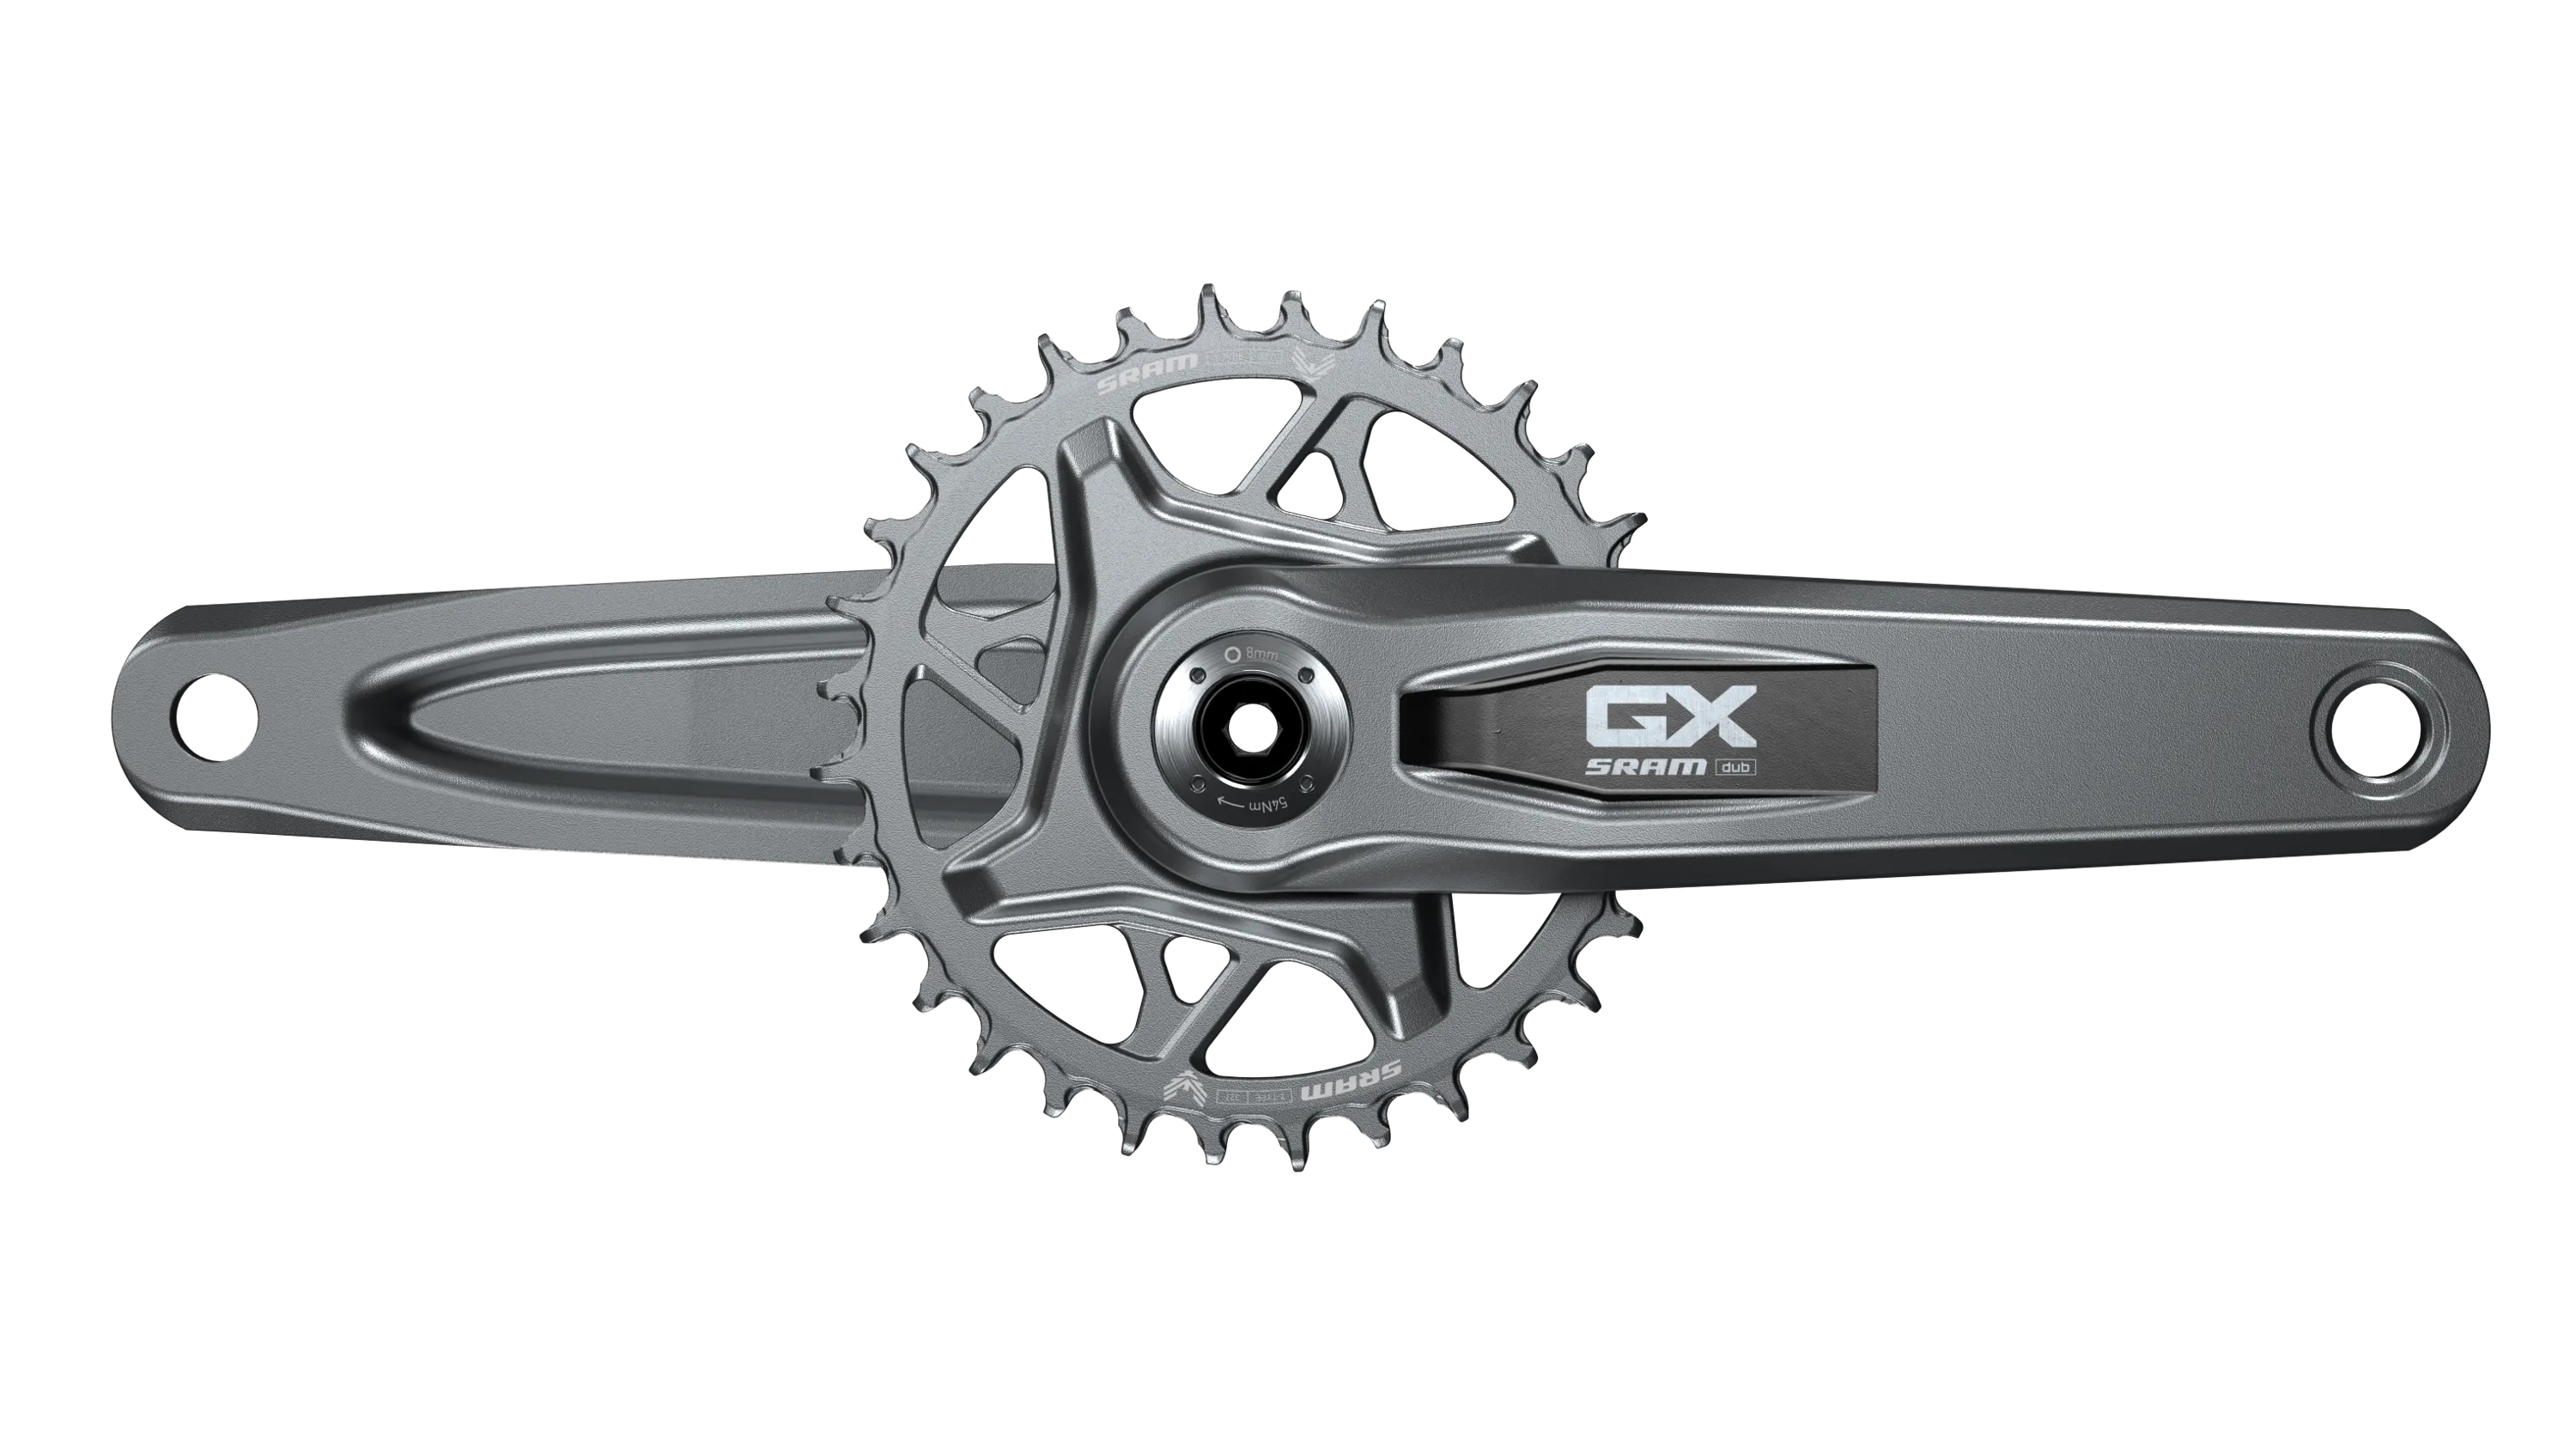 sram gx eagle transmission crankset and chainring on a white background